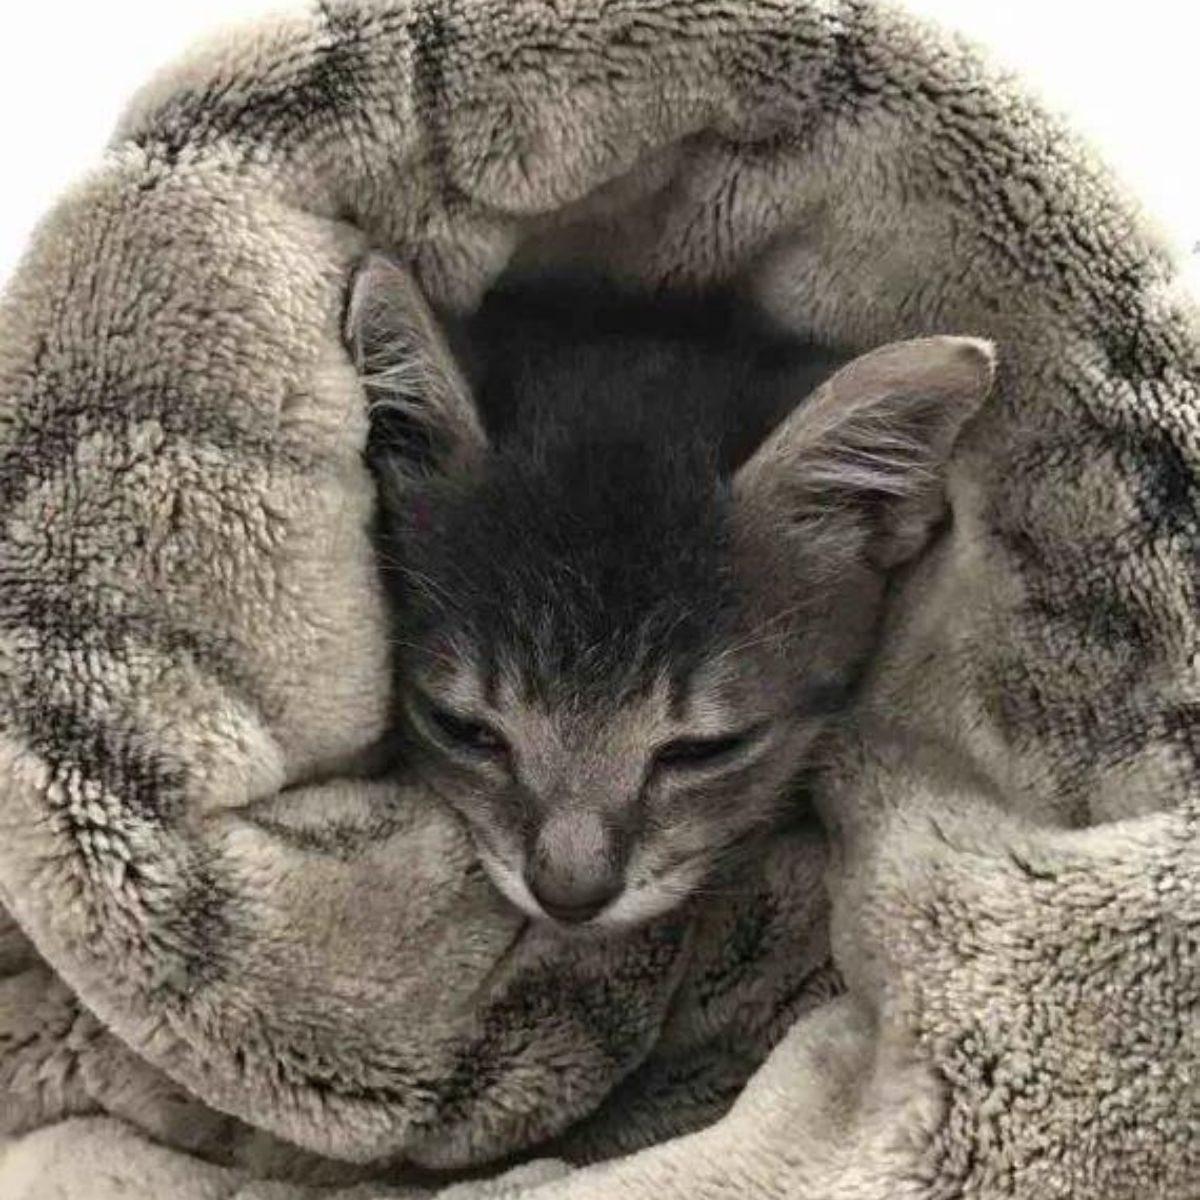 kitten wrapped up in a blanket